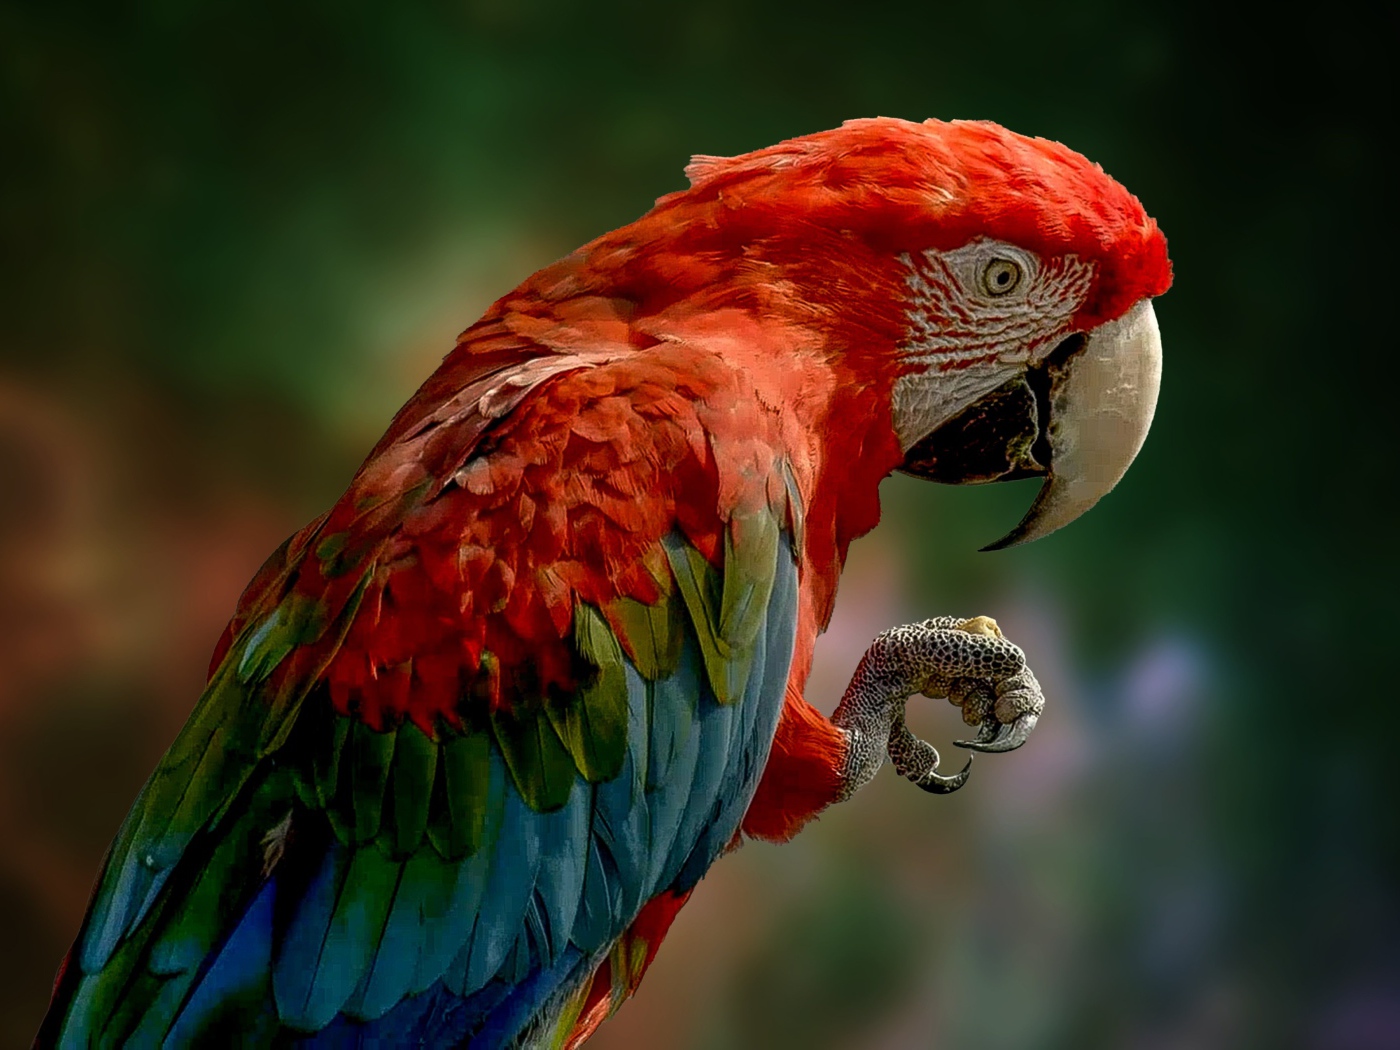 Big macaw with red head close up